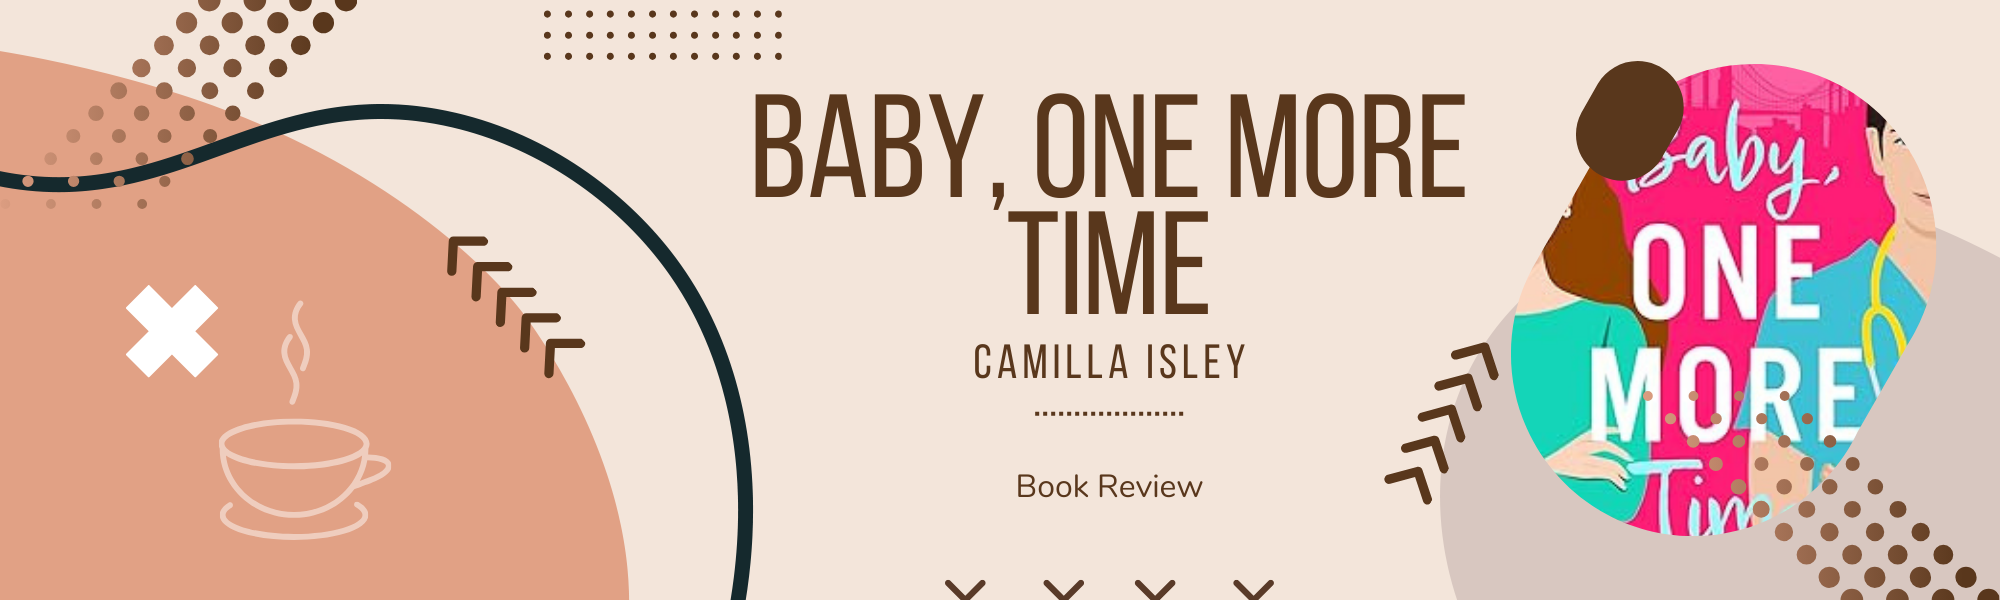 Book Review – ‘Baby, One More Time’ by Camilla Isley